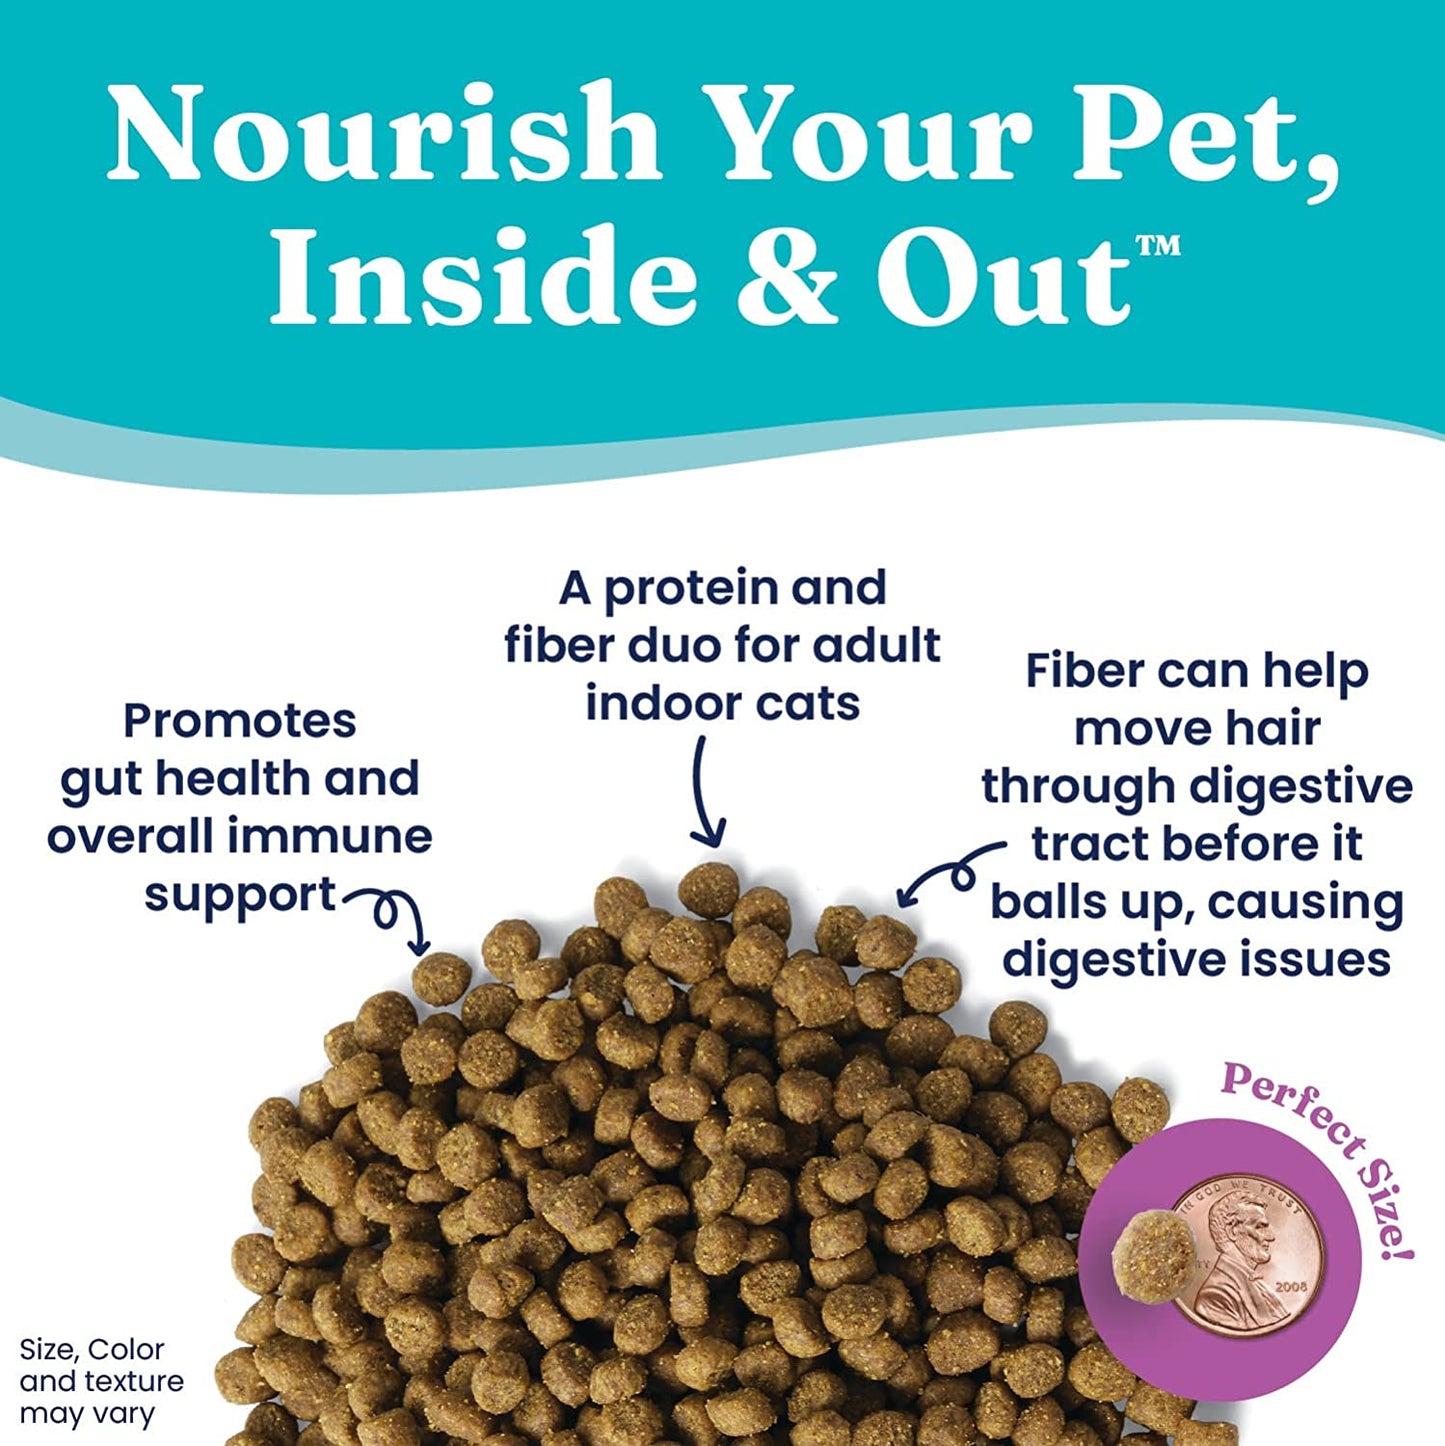 Solid Gold Indoor Dry Cat Food - Let'S Stay in Cat Food Dry Kibble for Indoor Cats - Hairball & Sensitive Stomach - Grain & Gluten Free - Probiotics & Fiber for Digestive Health - Chicken - 12Lb